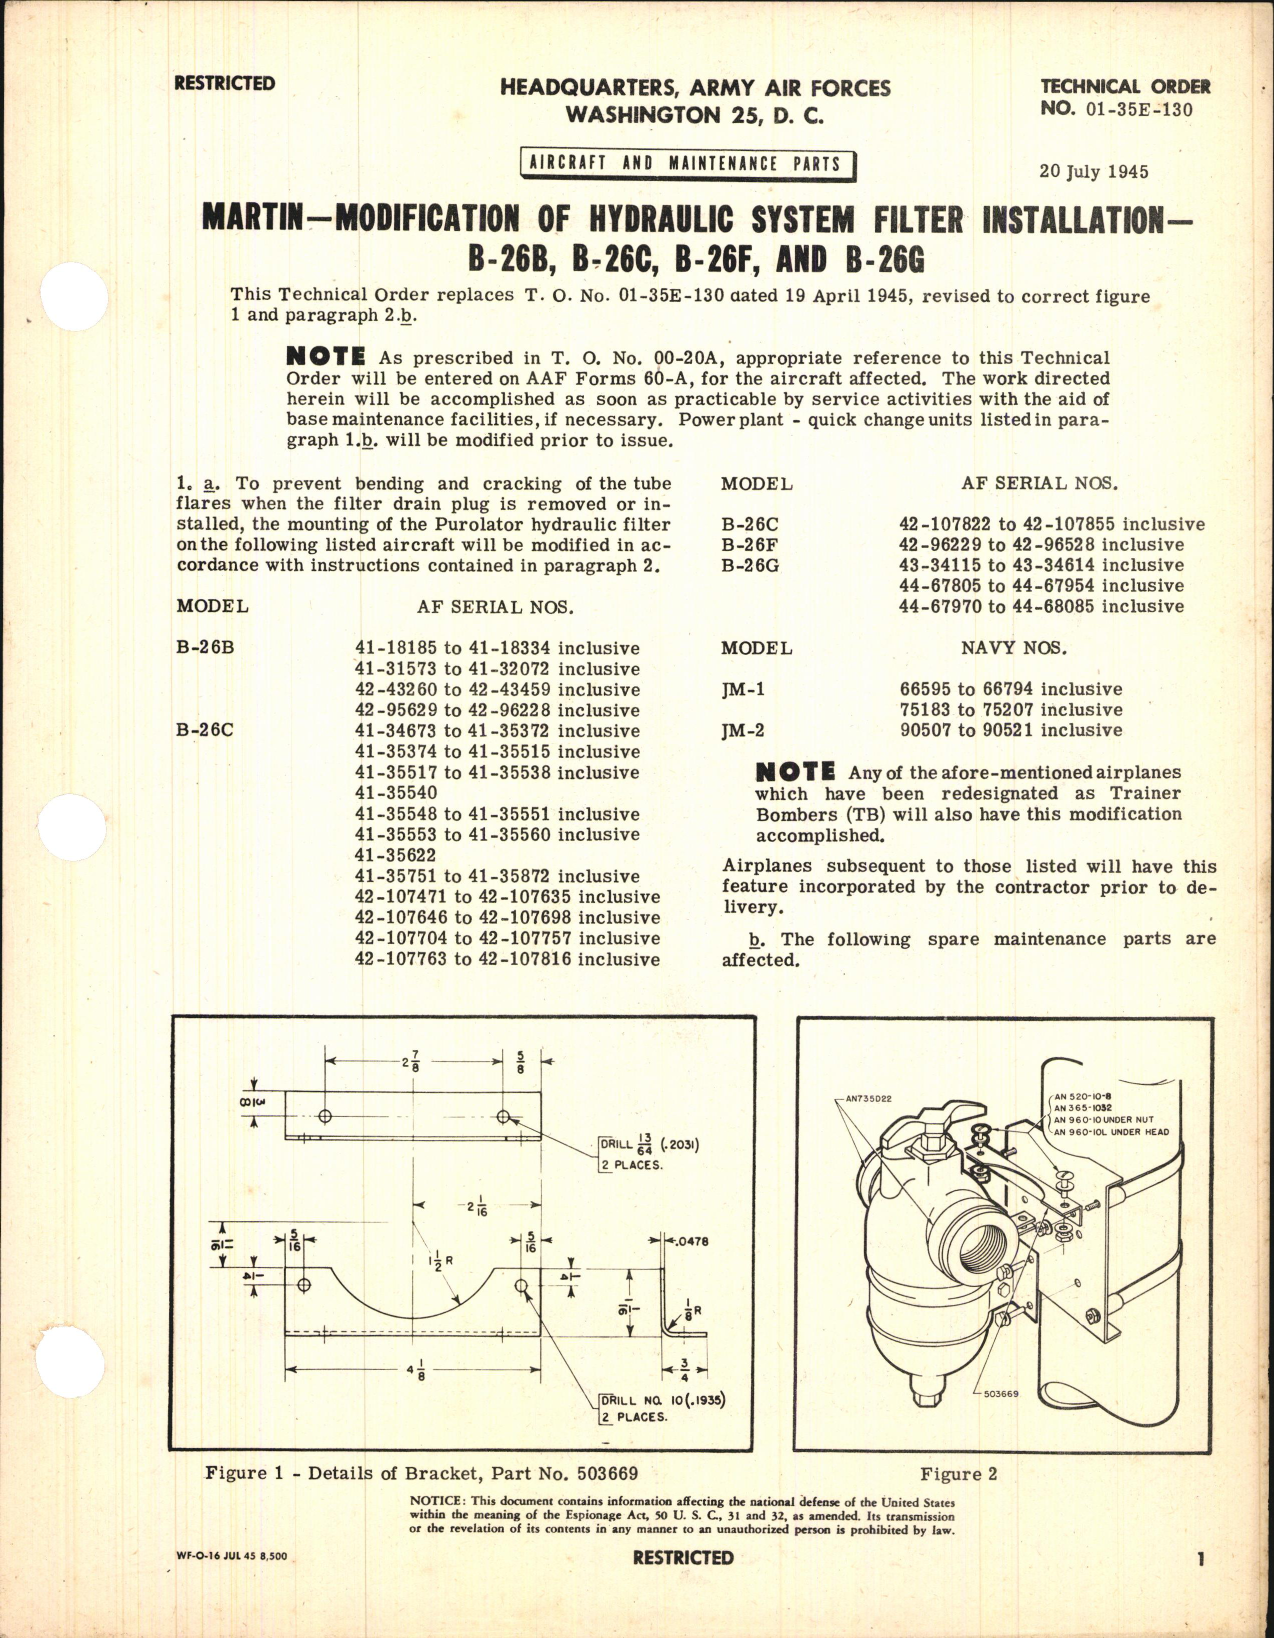 Sample page 1 from AirCorps Library document: Modification of Hydraulic System Filter Installation for B-26B, B-26C, B-26F, and B-26G